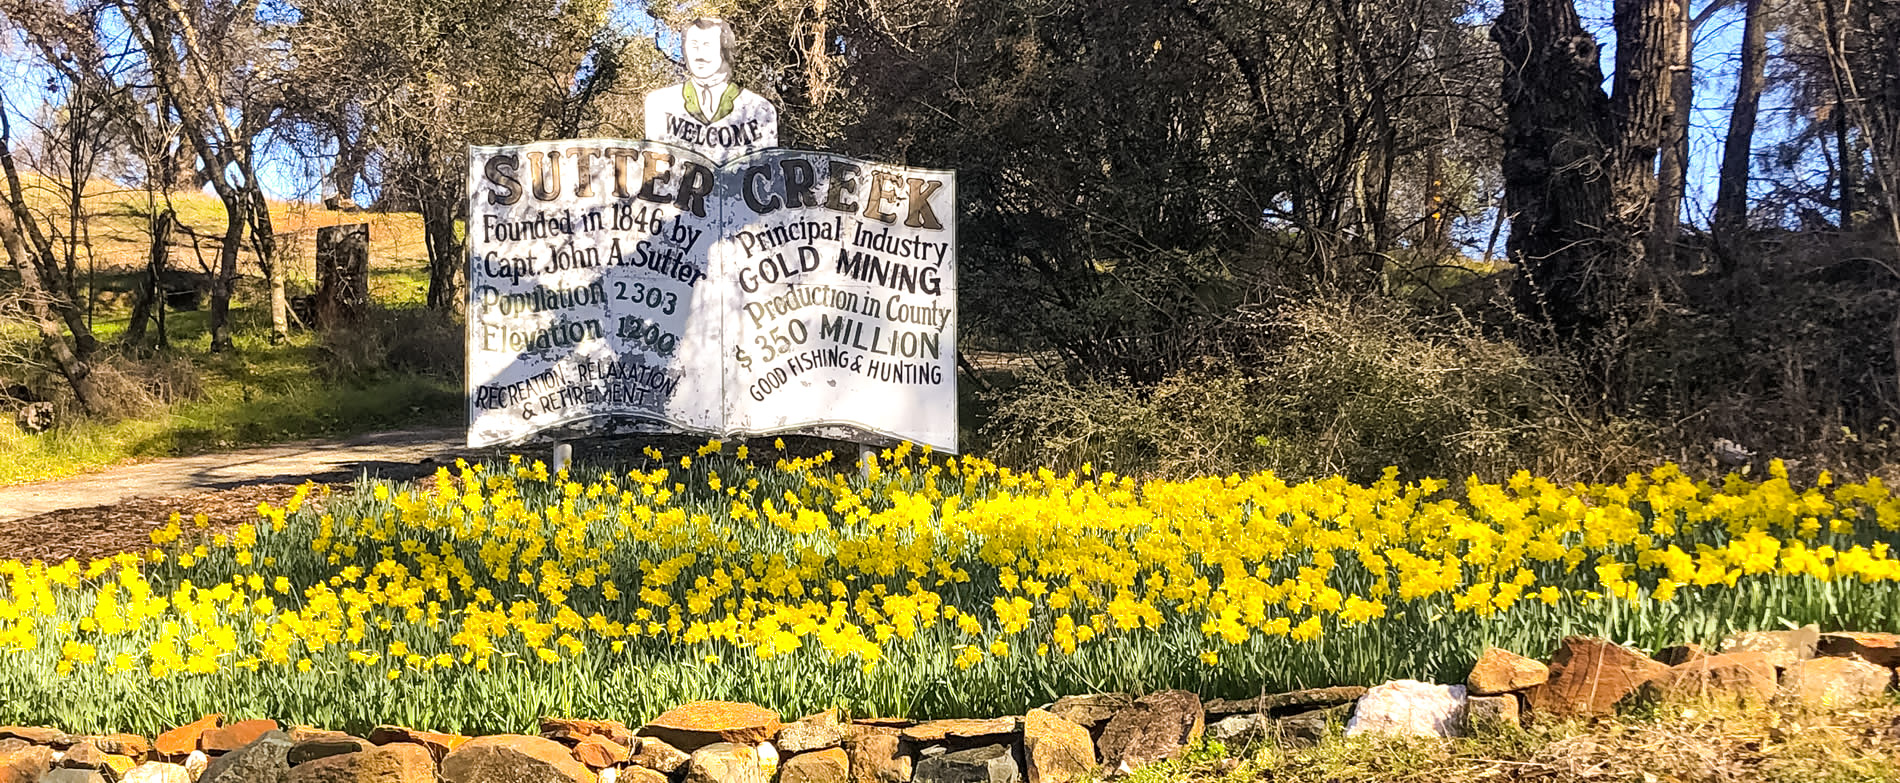 sutter creek sign with daffodils